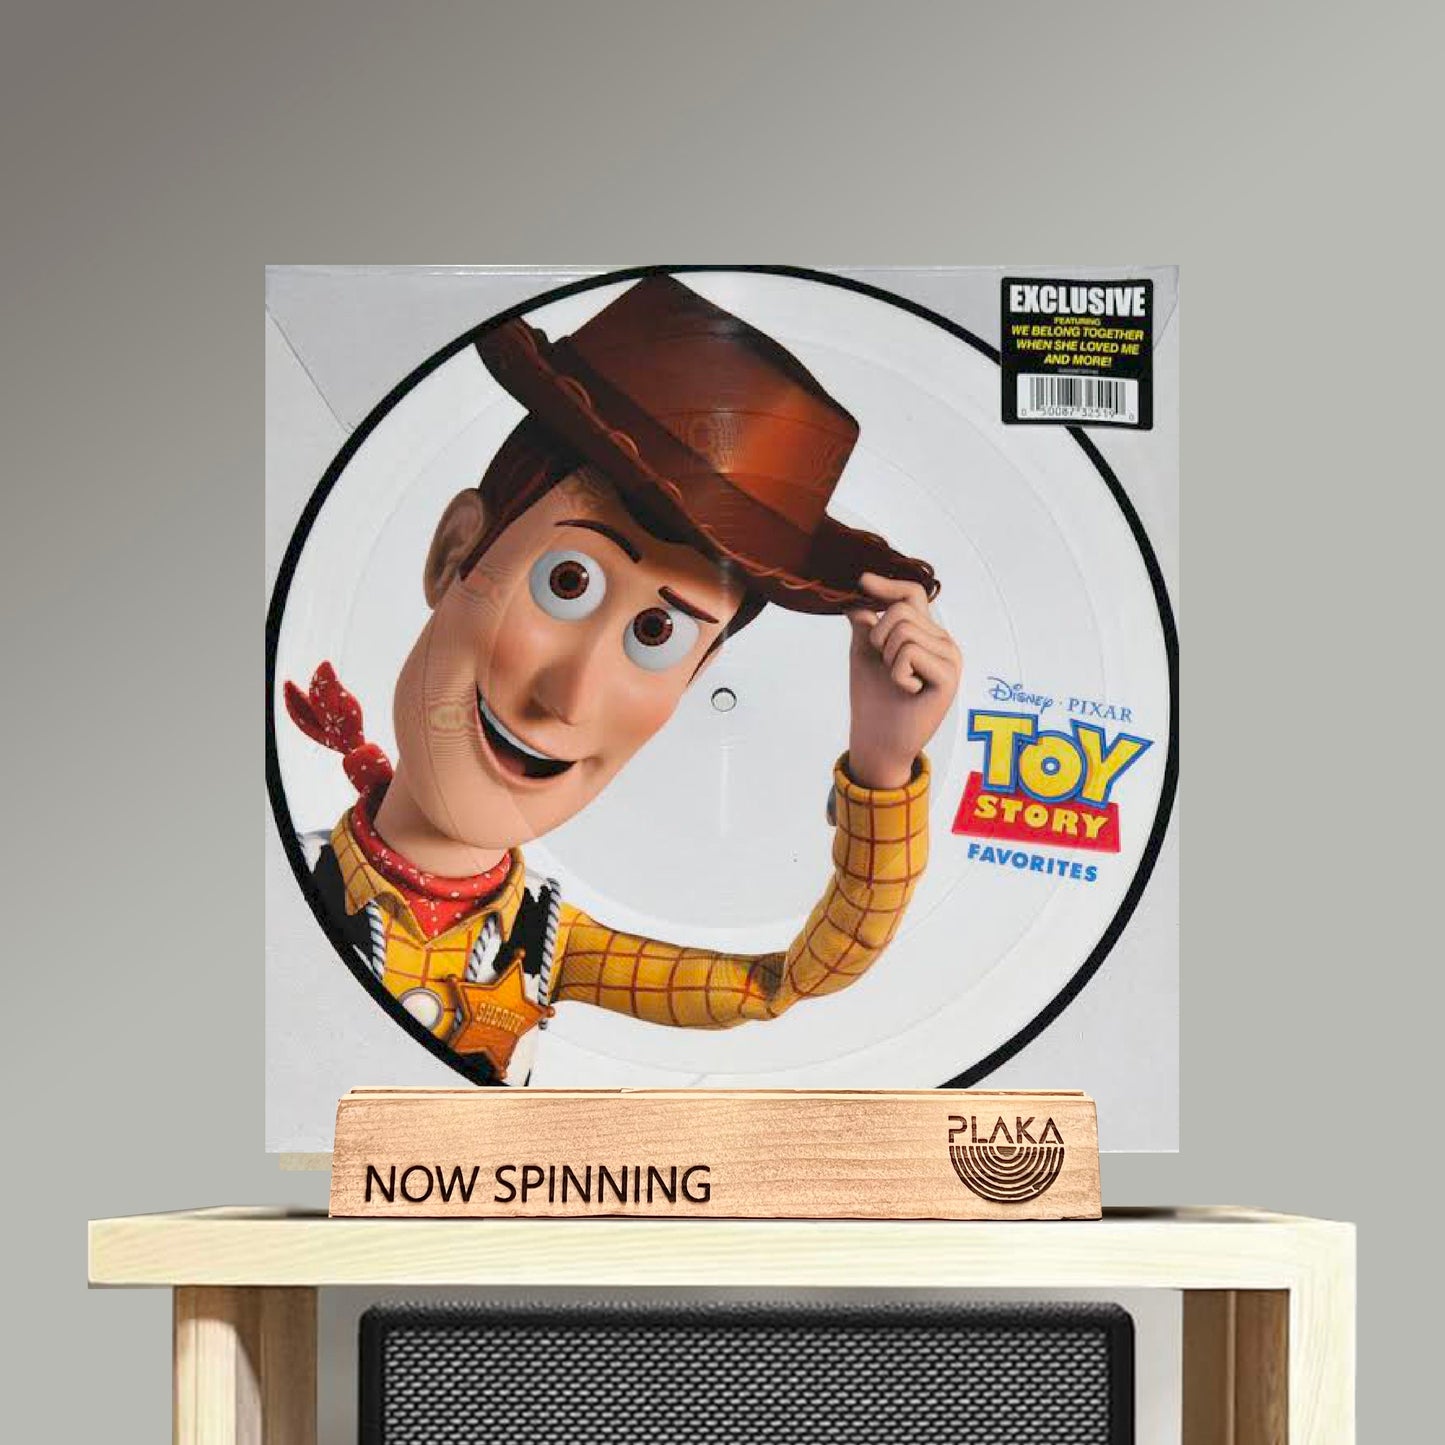 Toy Story Favorites - OST